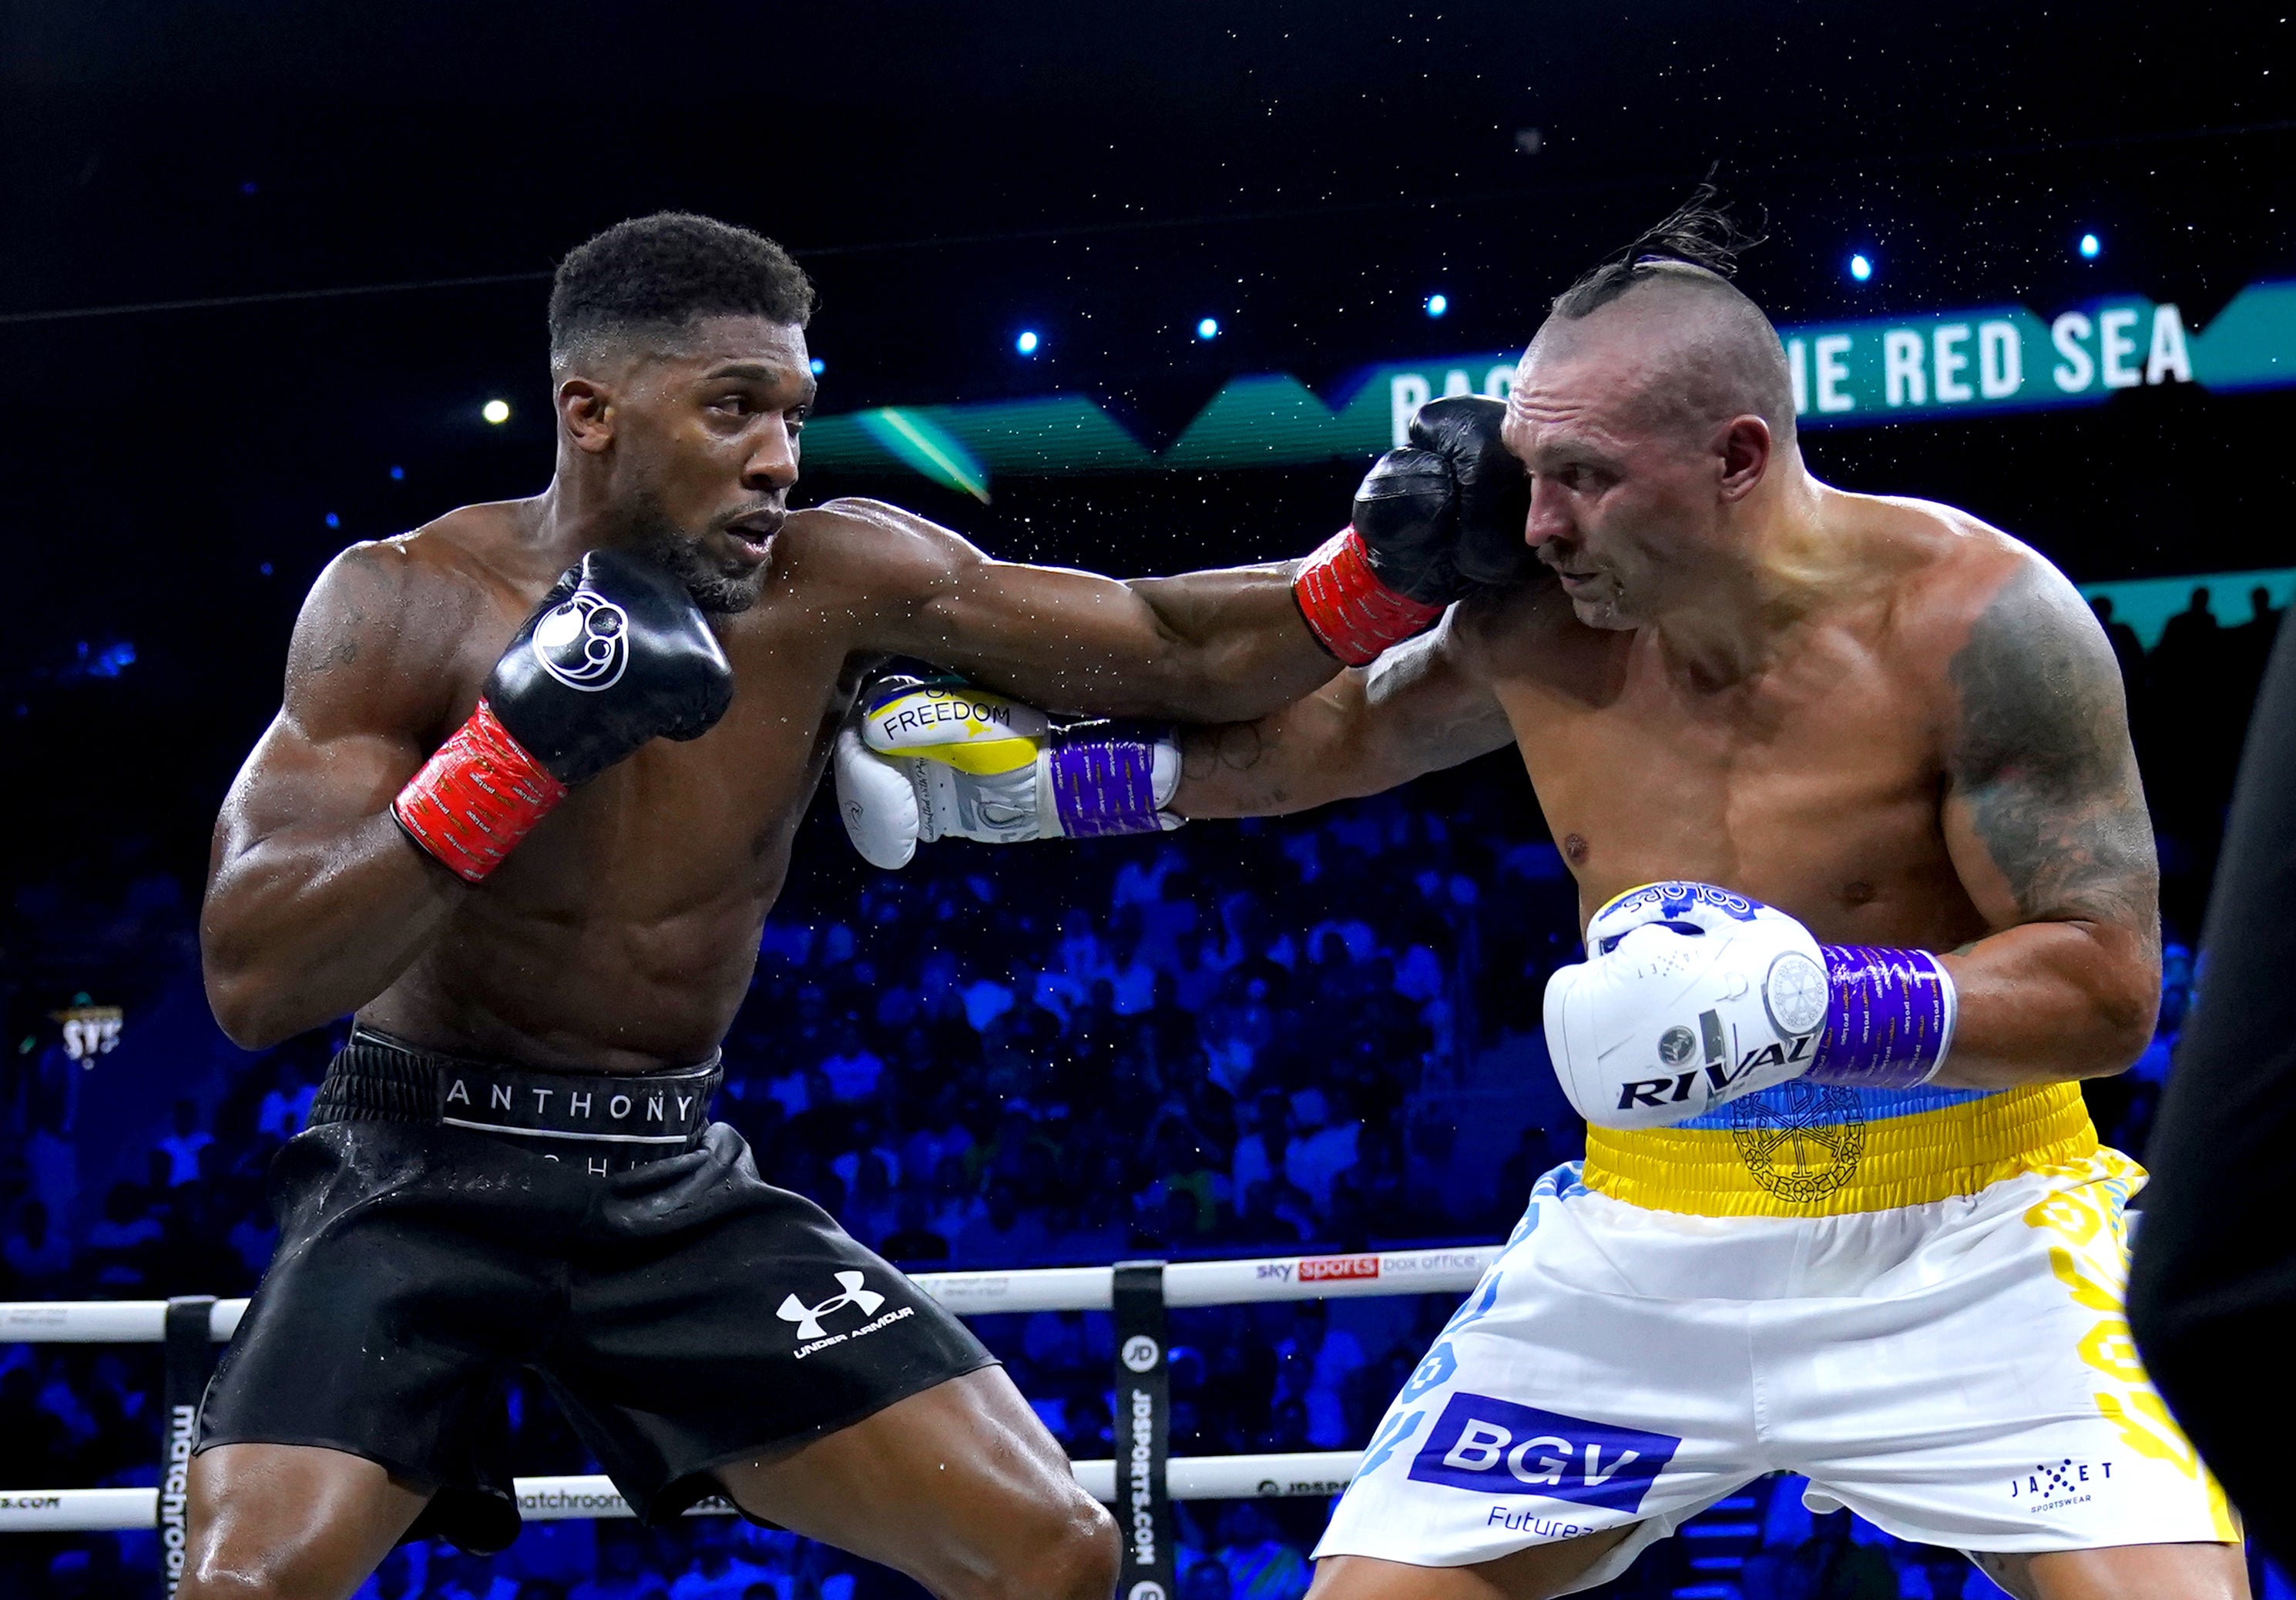 Anthony Joshua (left) suffered his second straight loss to Oleksandr Usyk last month (Nick Potts/PA)